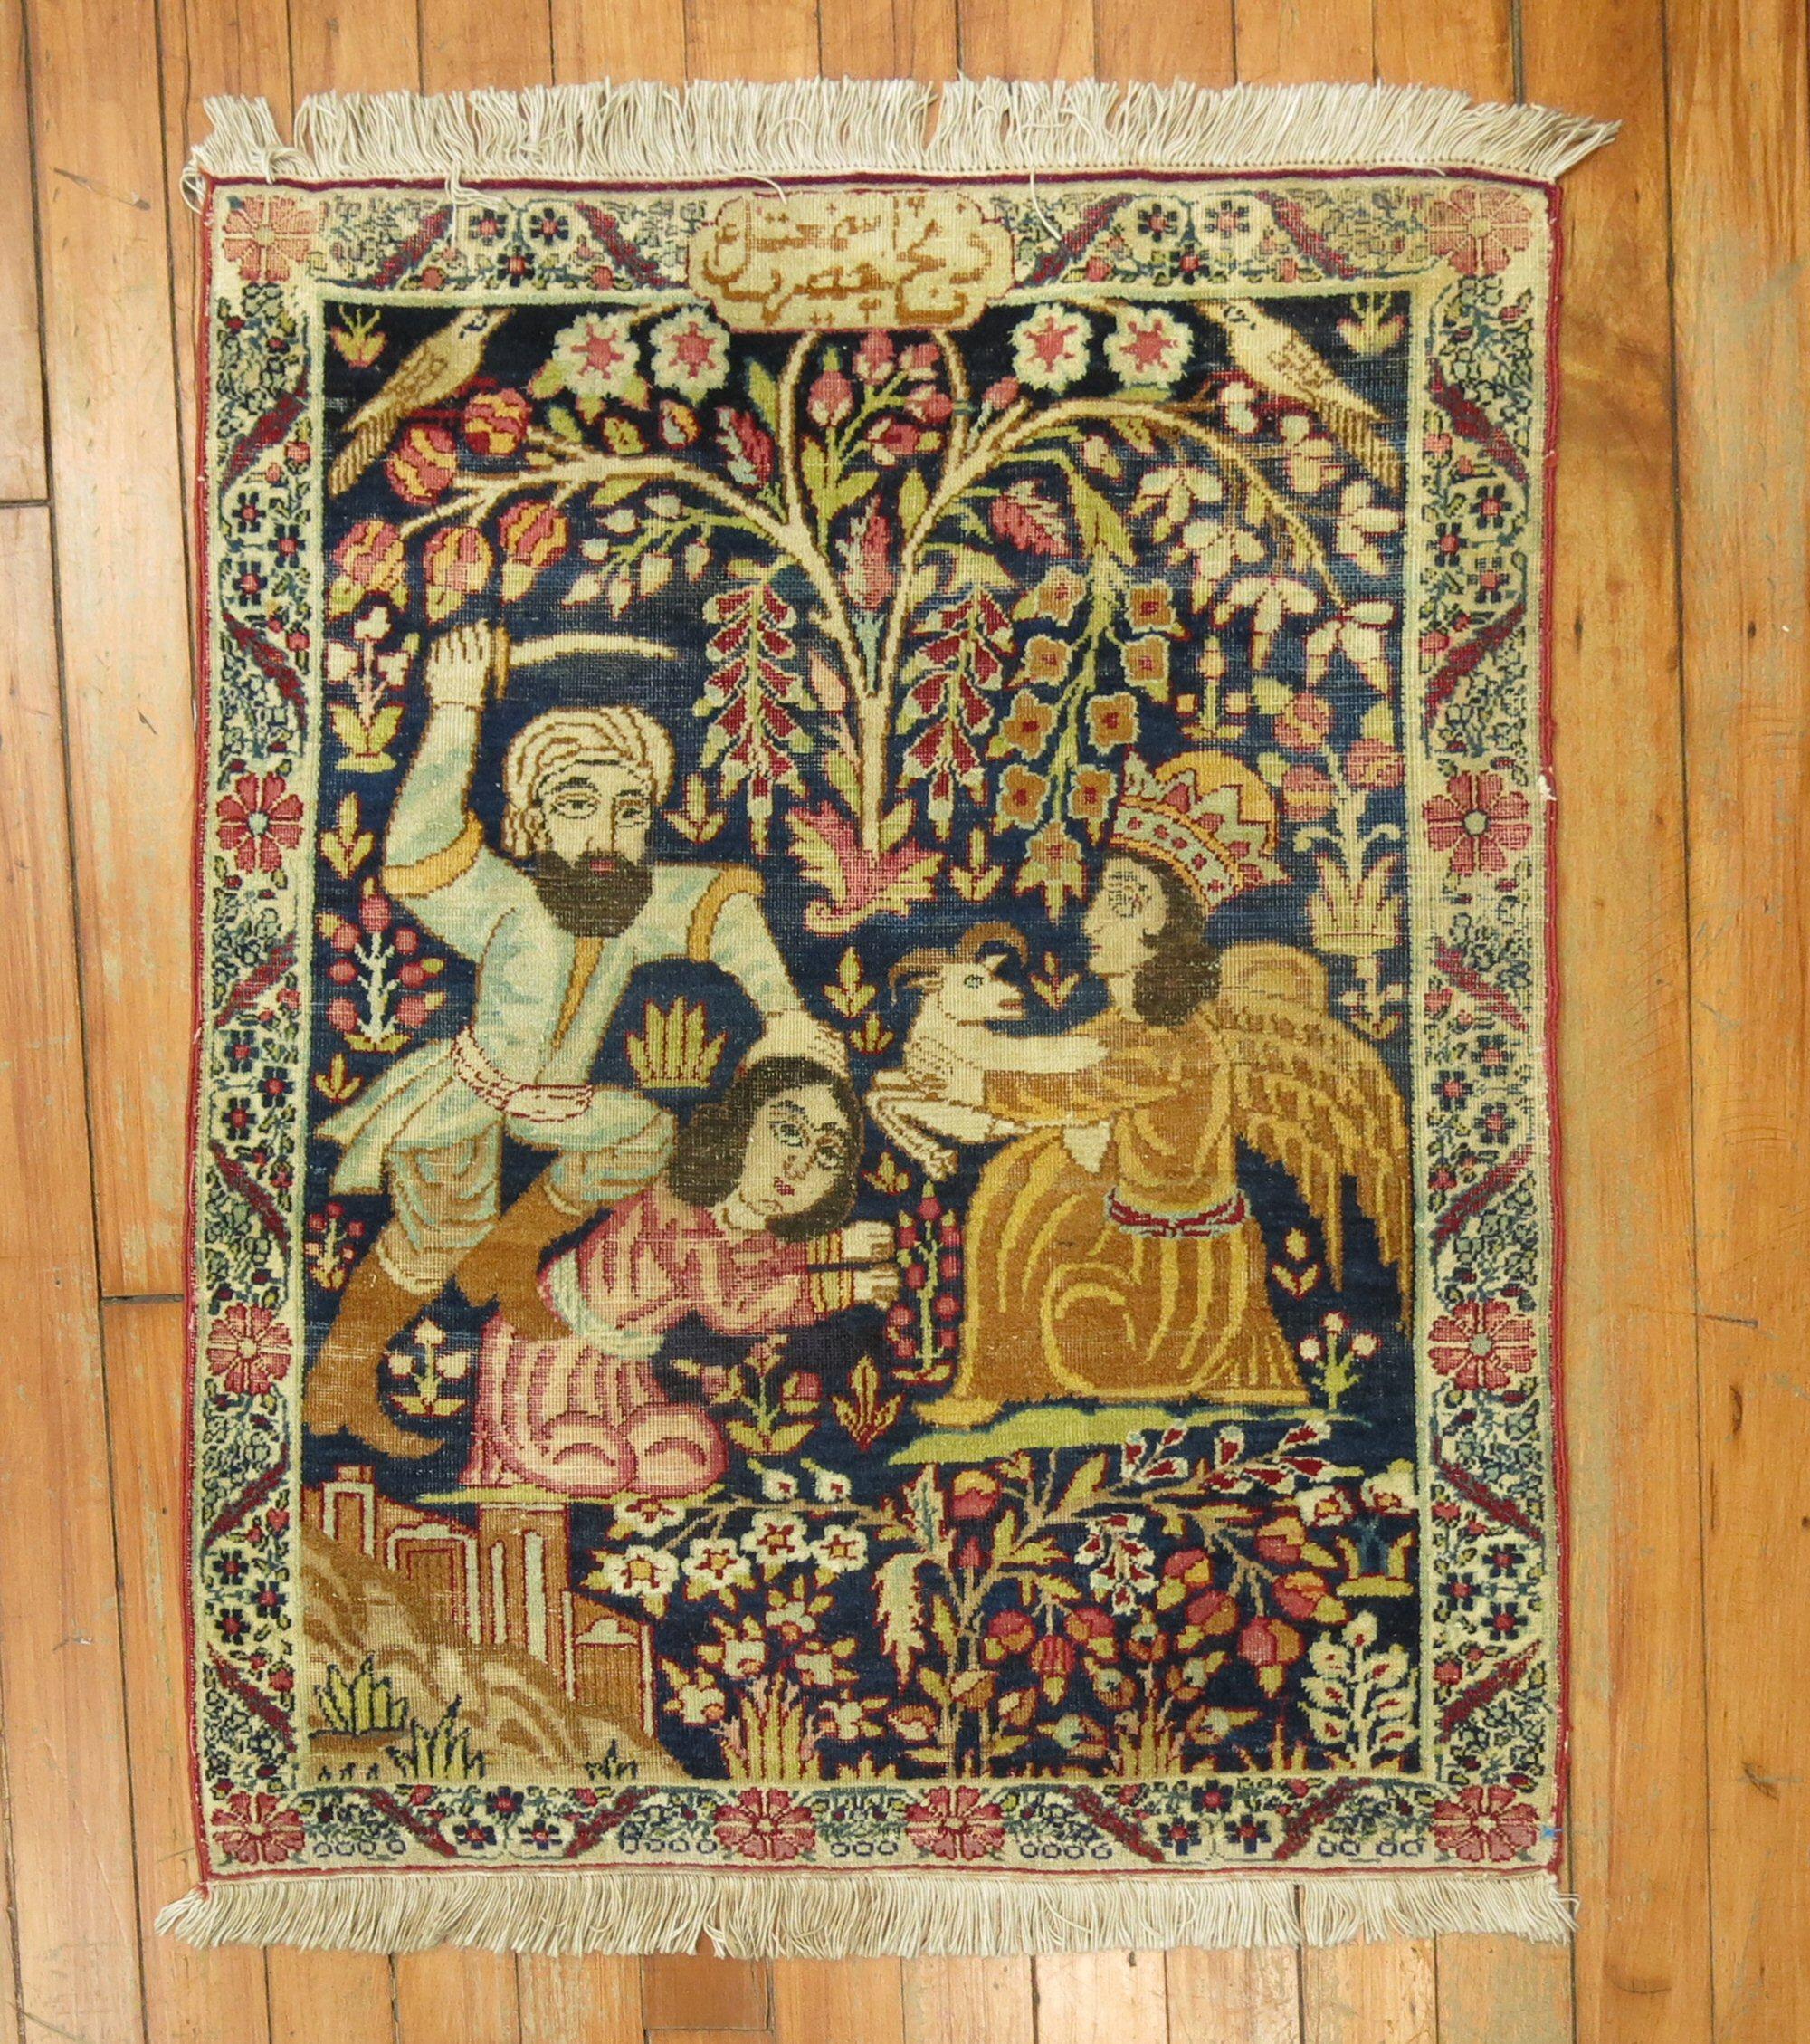 a late 19th century lavar kerman rug depicting God sending and angel to try to save a Father killing his only child with a sheep

Details
rug no.	j1321
size	2' x 2' 4